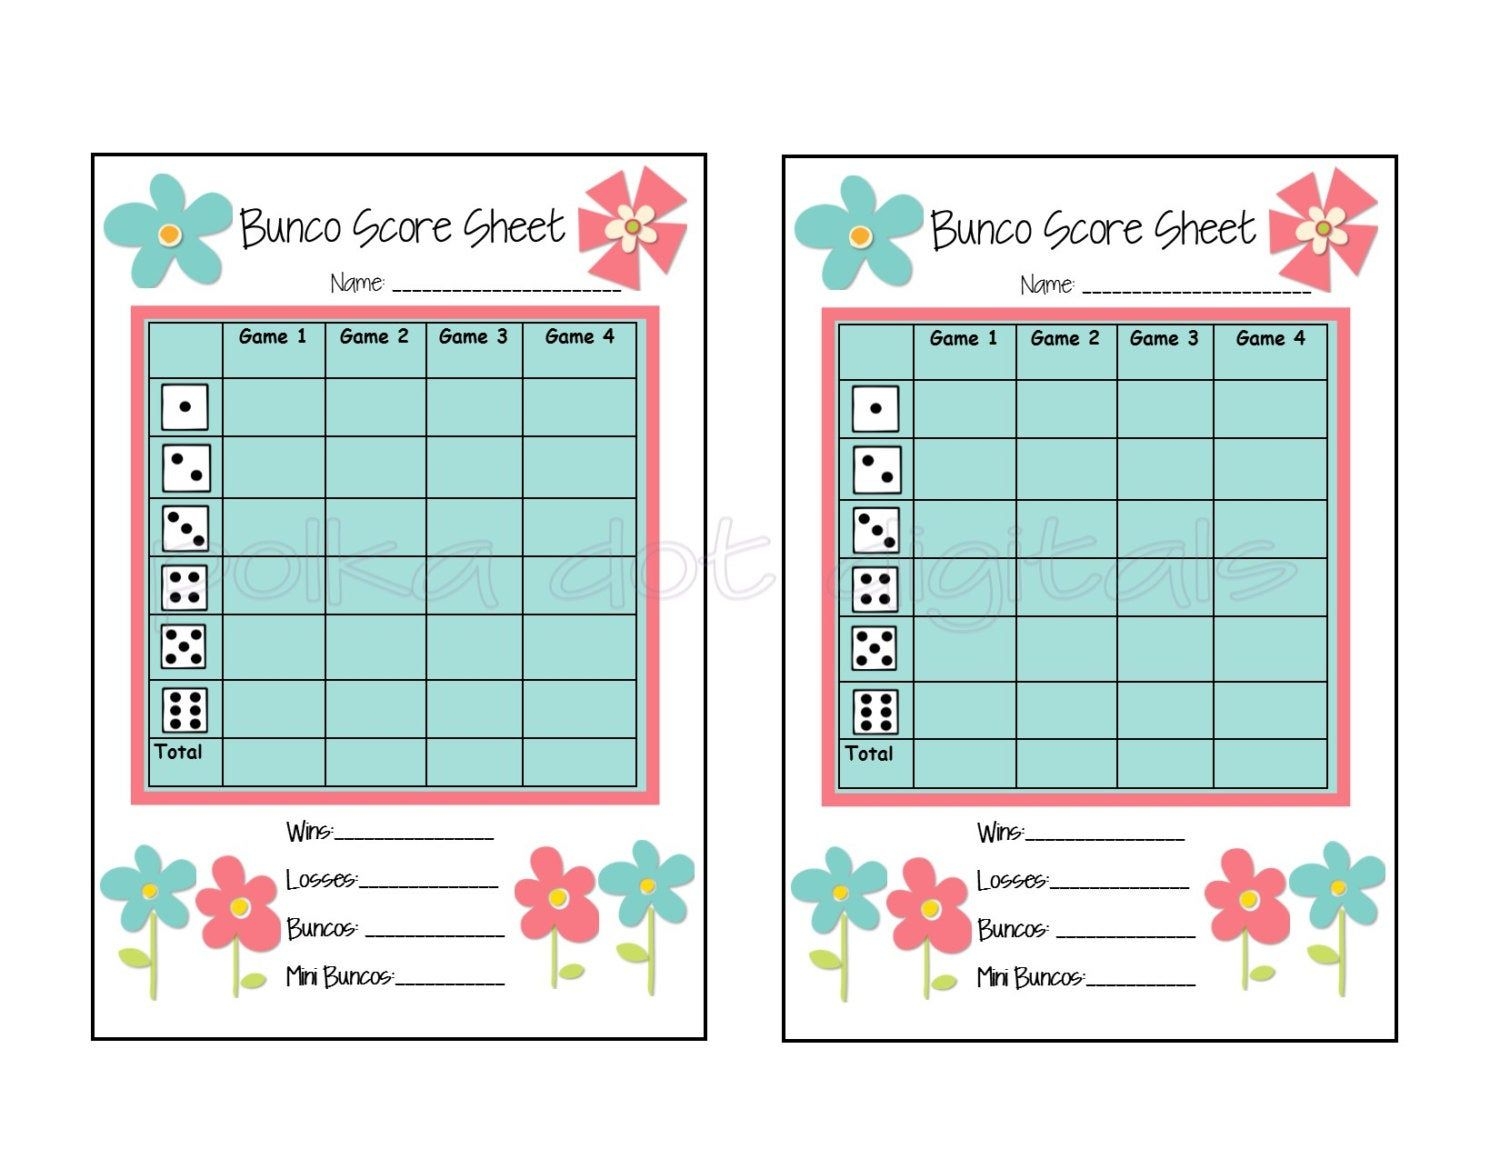 Pool Party Bunco Score Cards And Table Tents Digital Downloads PDF And Individual Png s Etsy Bunco Bunco Score Sheets Bunco Game